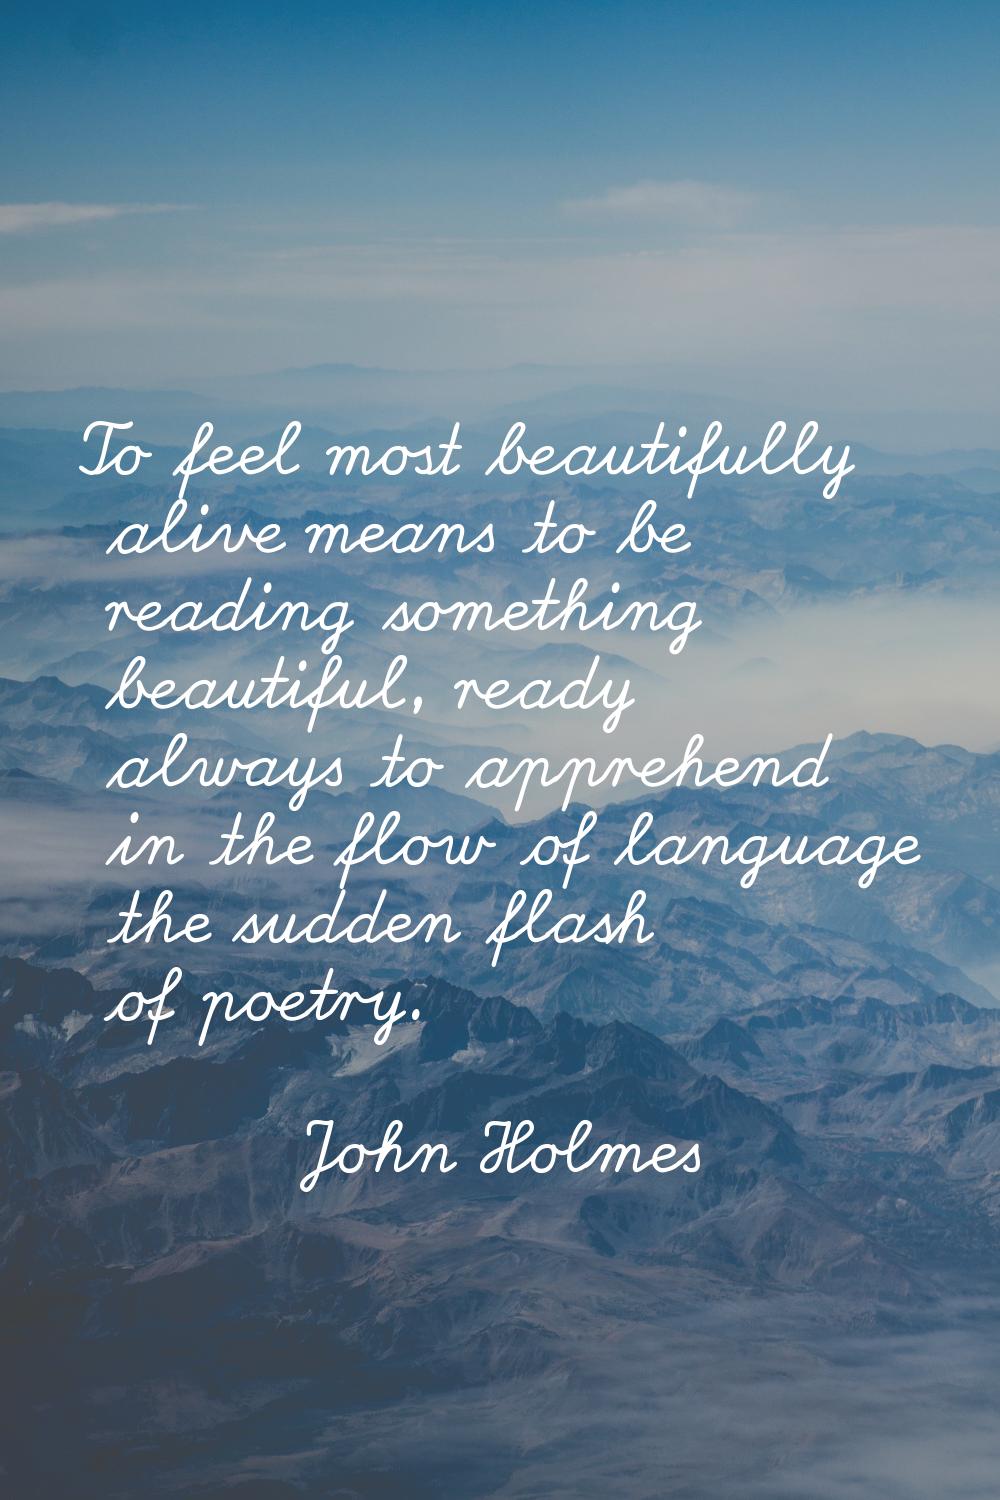 To feel most beautifully alive means to be reading something beautiful, ready always to apprehend i